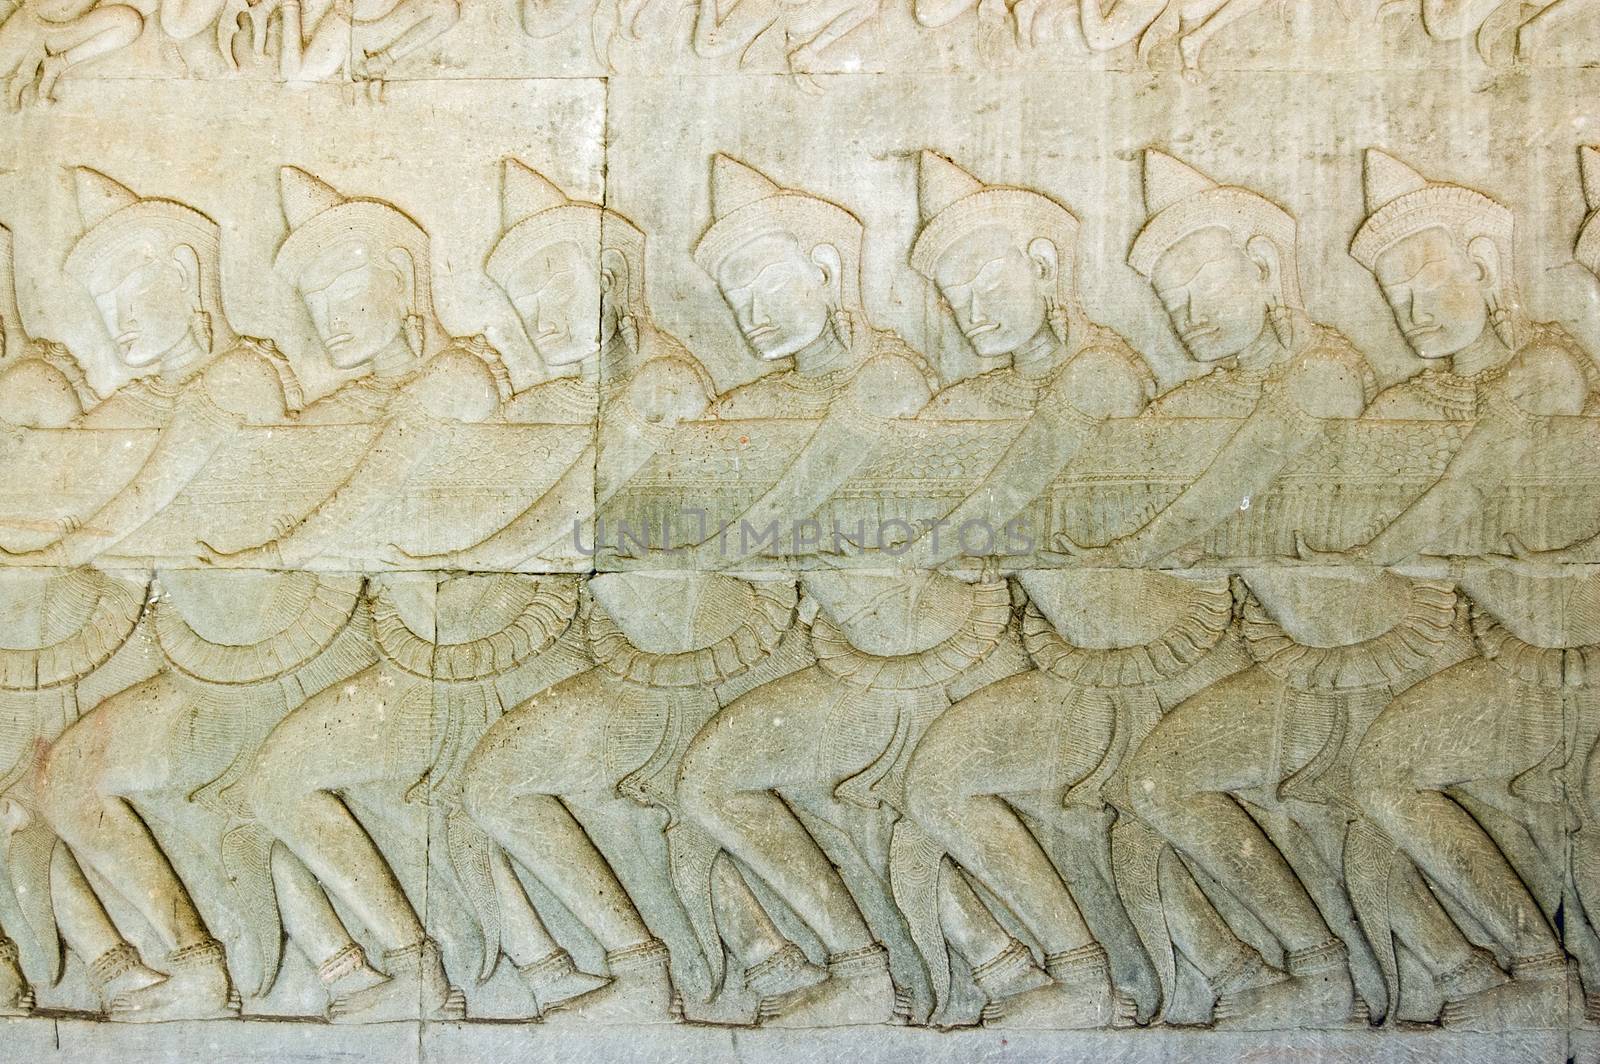 Ancient Khmer bas relief carving showing a row of Hindu gods, devas, pulling on the snake Vasuki. Legend of the churning of the Ocean of Milk, Angkor Wat temple, Cambodia.